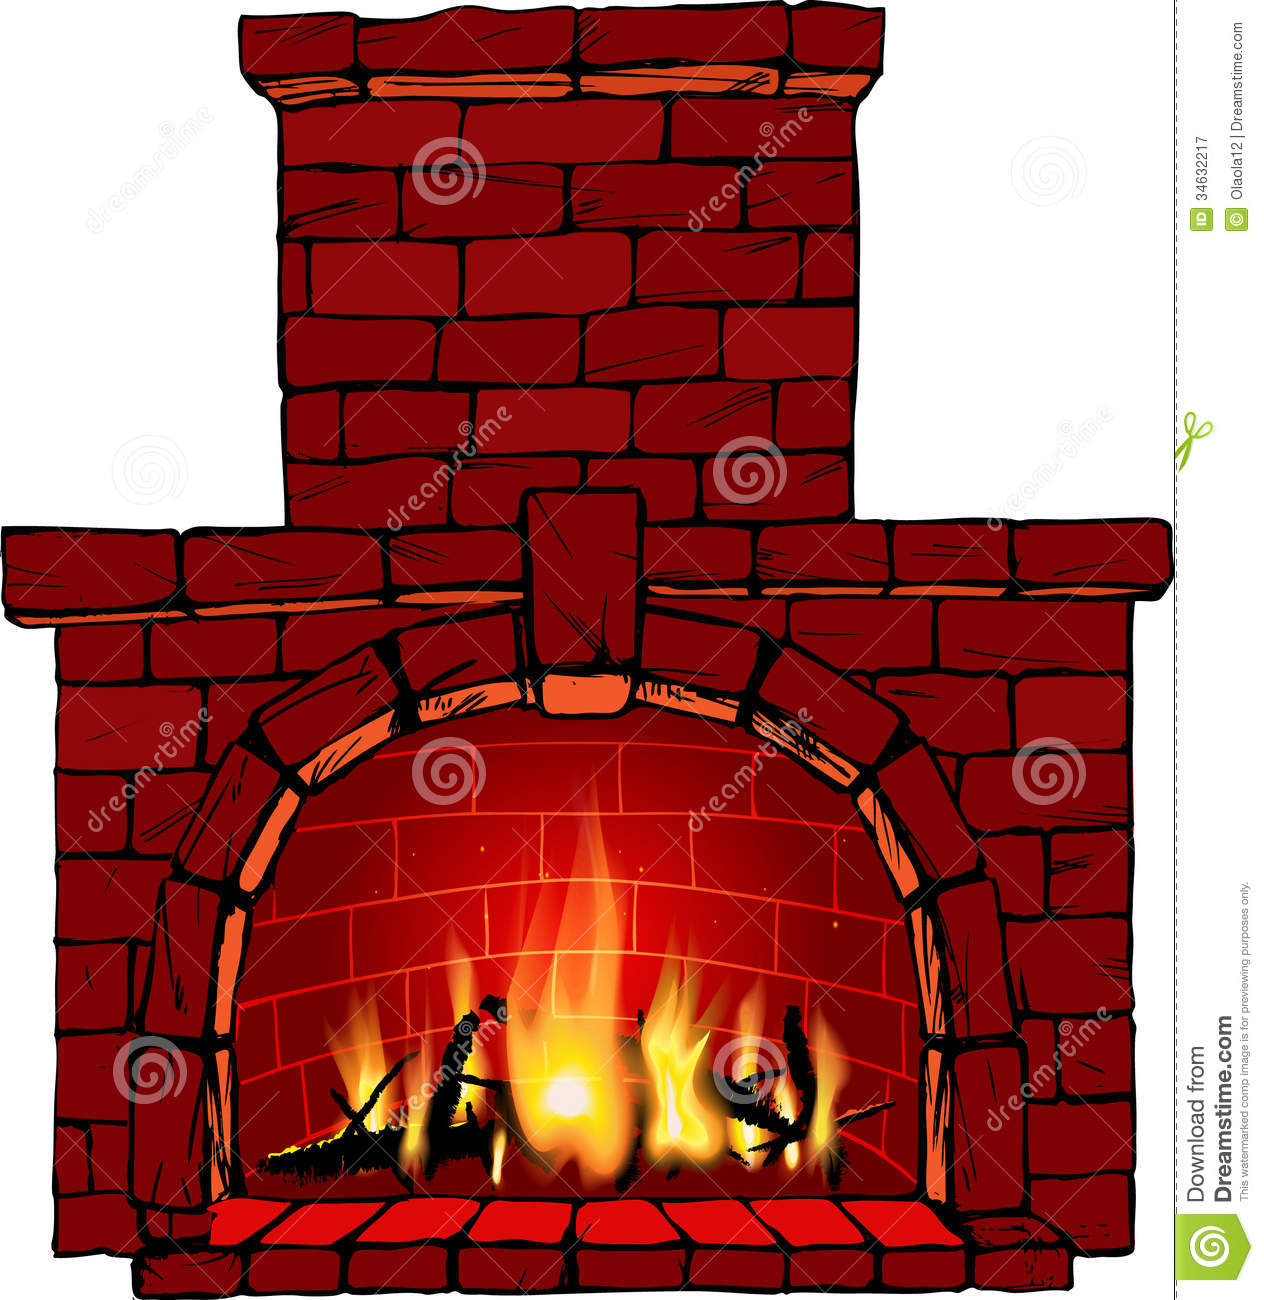 Fireplace Royalty Free Stock Photography   Image  34632217